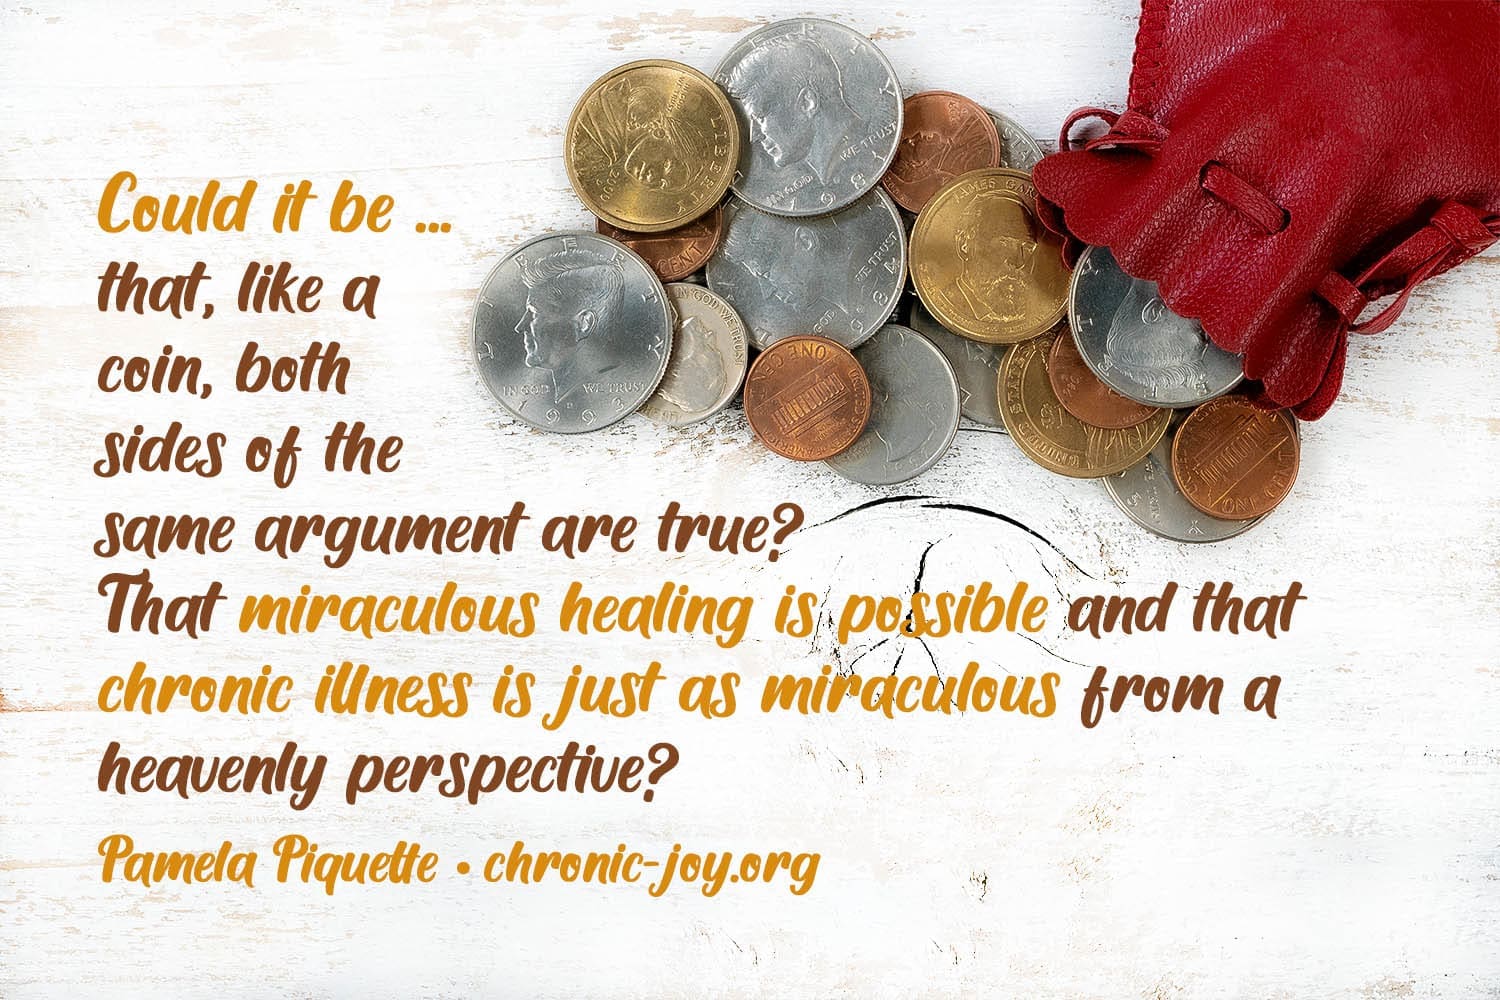 "Could it be ... that, like a coin, both sides of the same argument are true? That miraculous healing is possible and that chronic illness is just as miraculous from a heavenly perspective?" Pamela Piquette